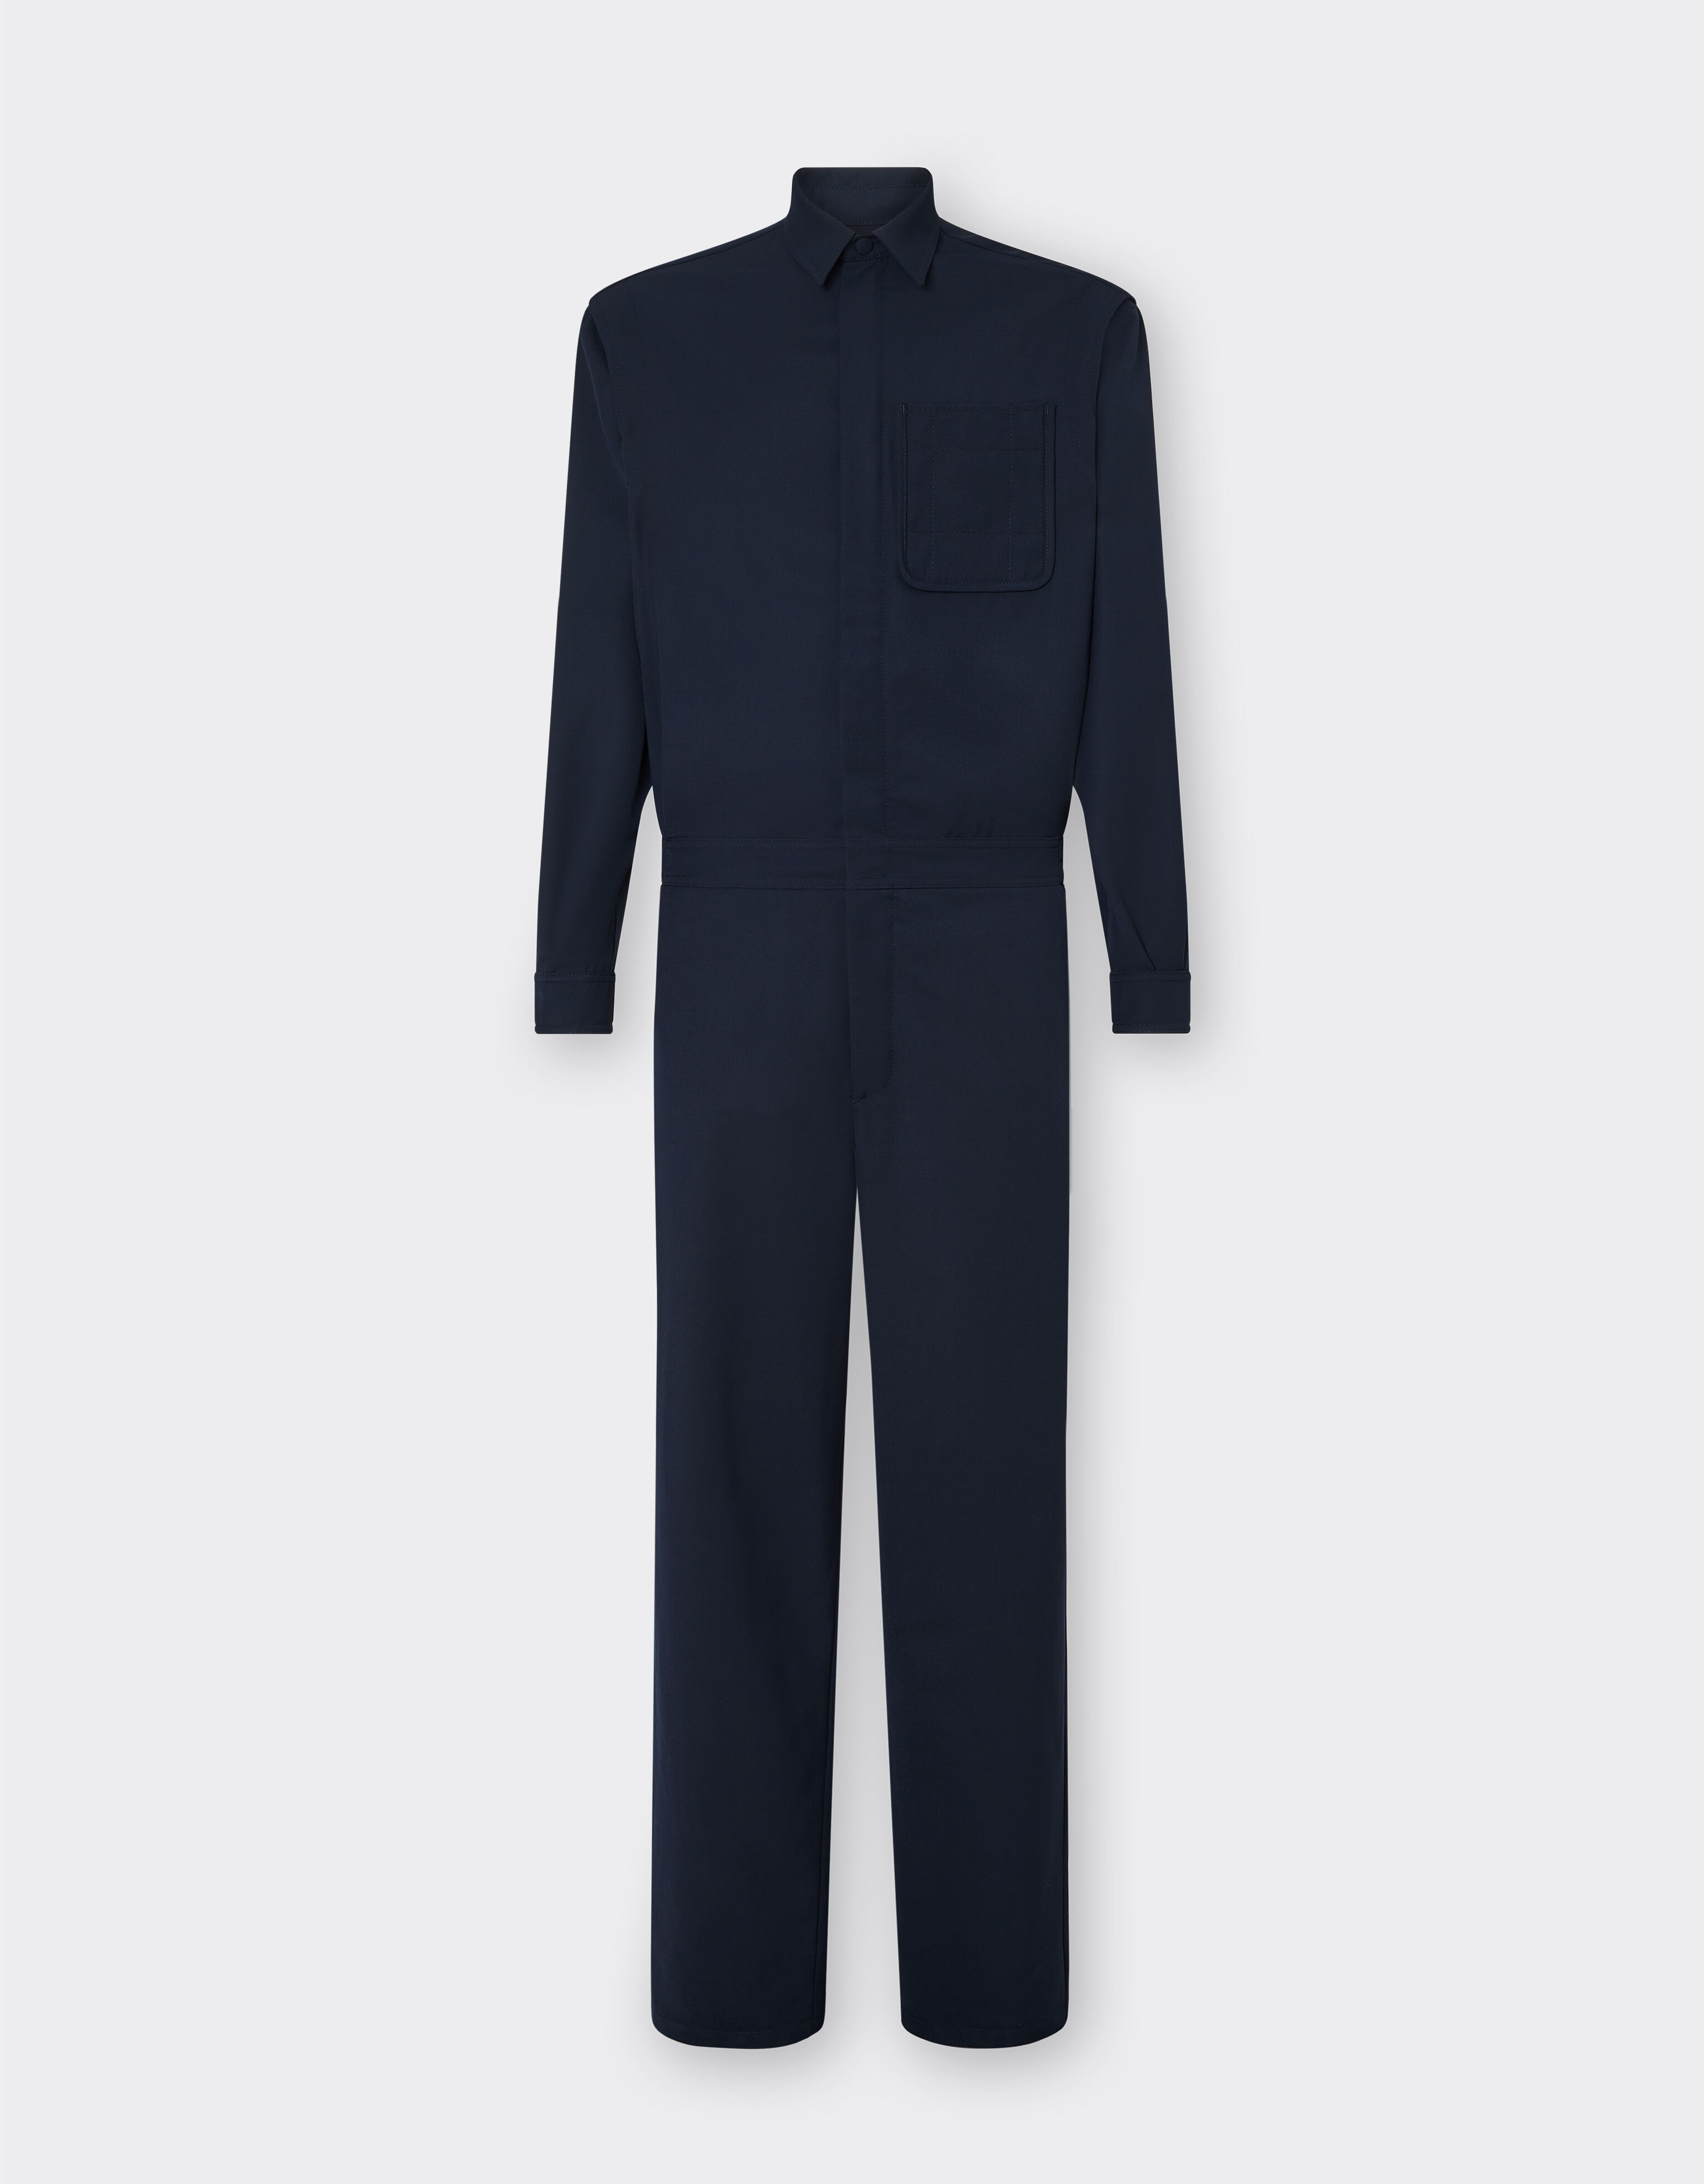 Ferrari Jumpsuit in technical wool with breast pocket with 7X7 checked motif Blu Scozia 47525f